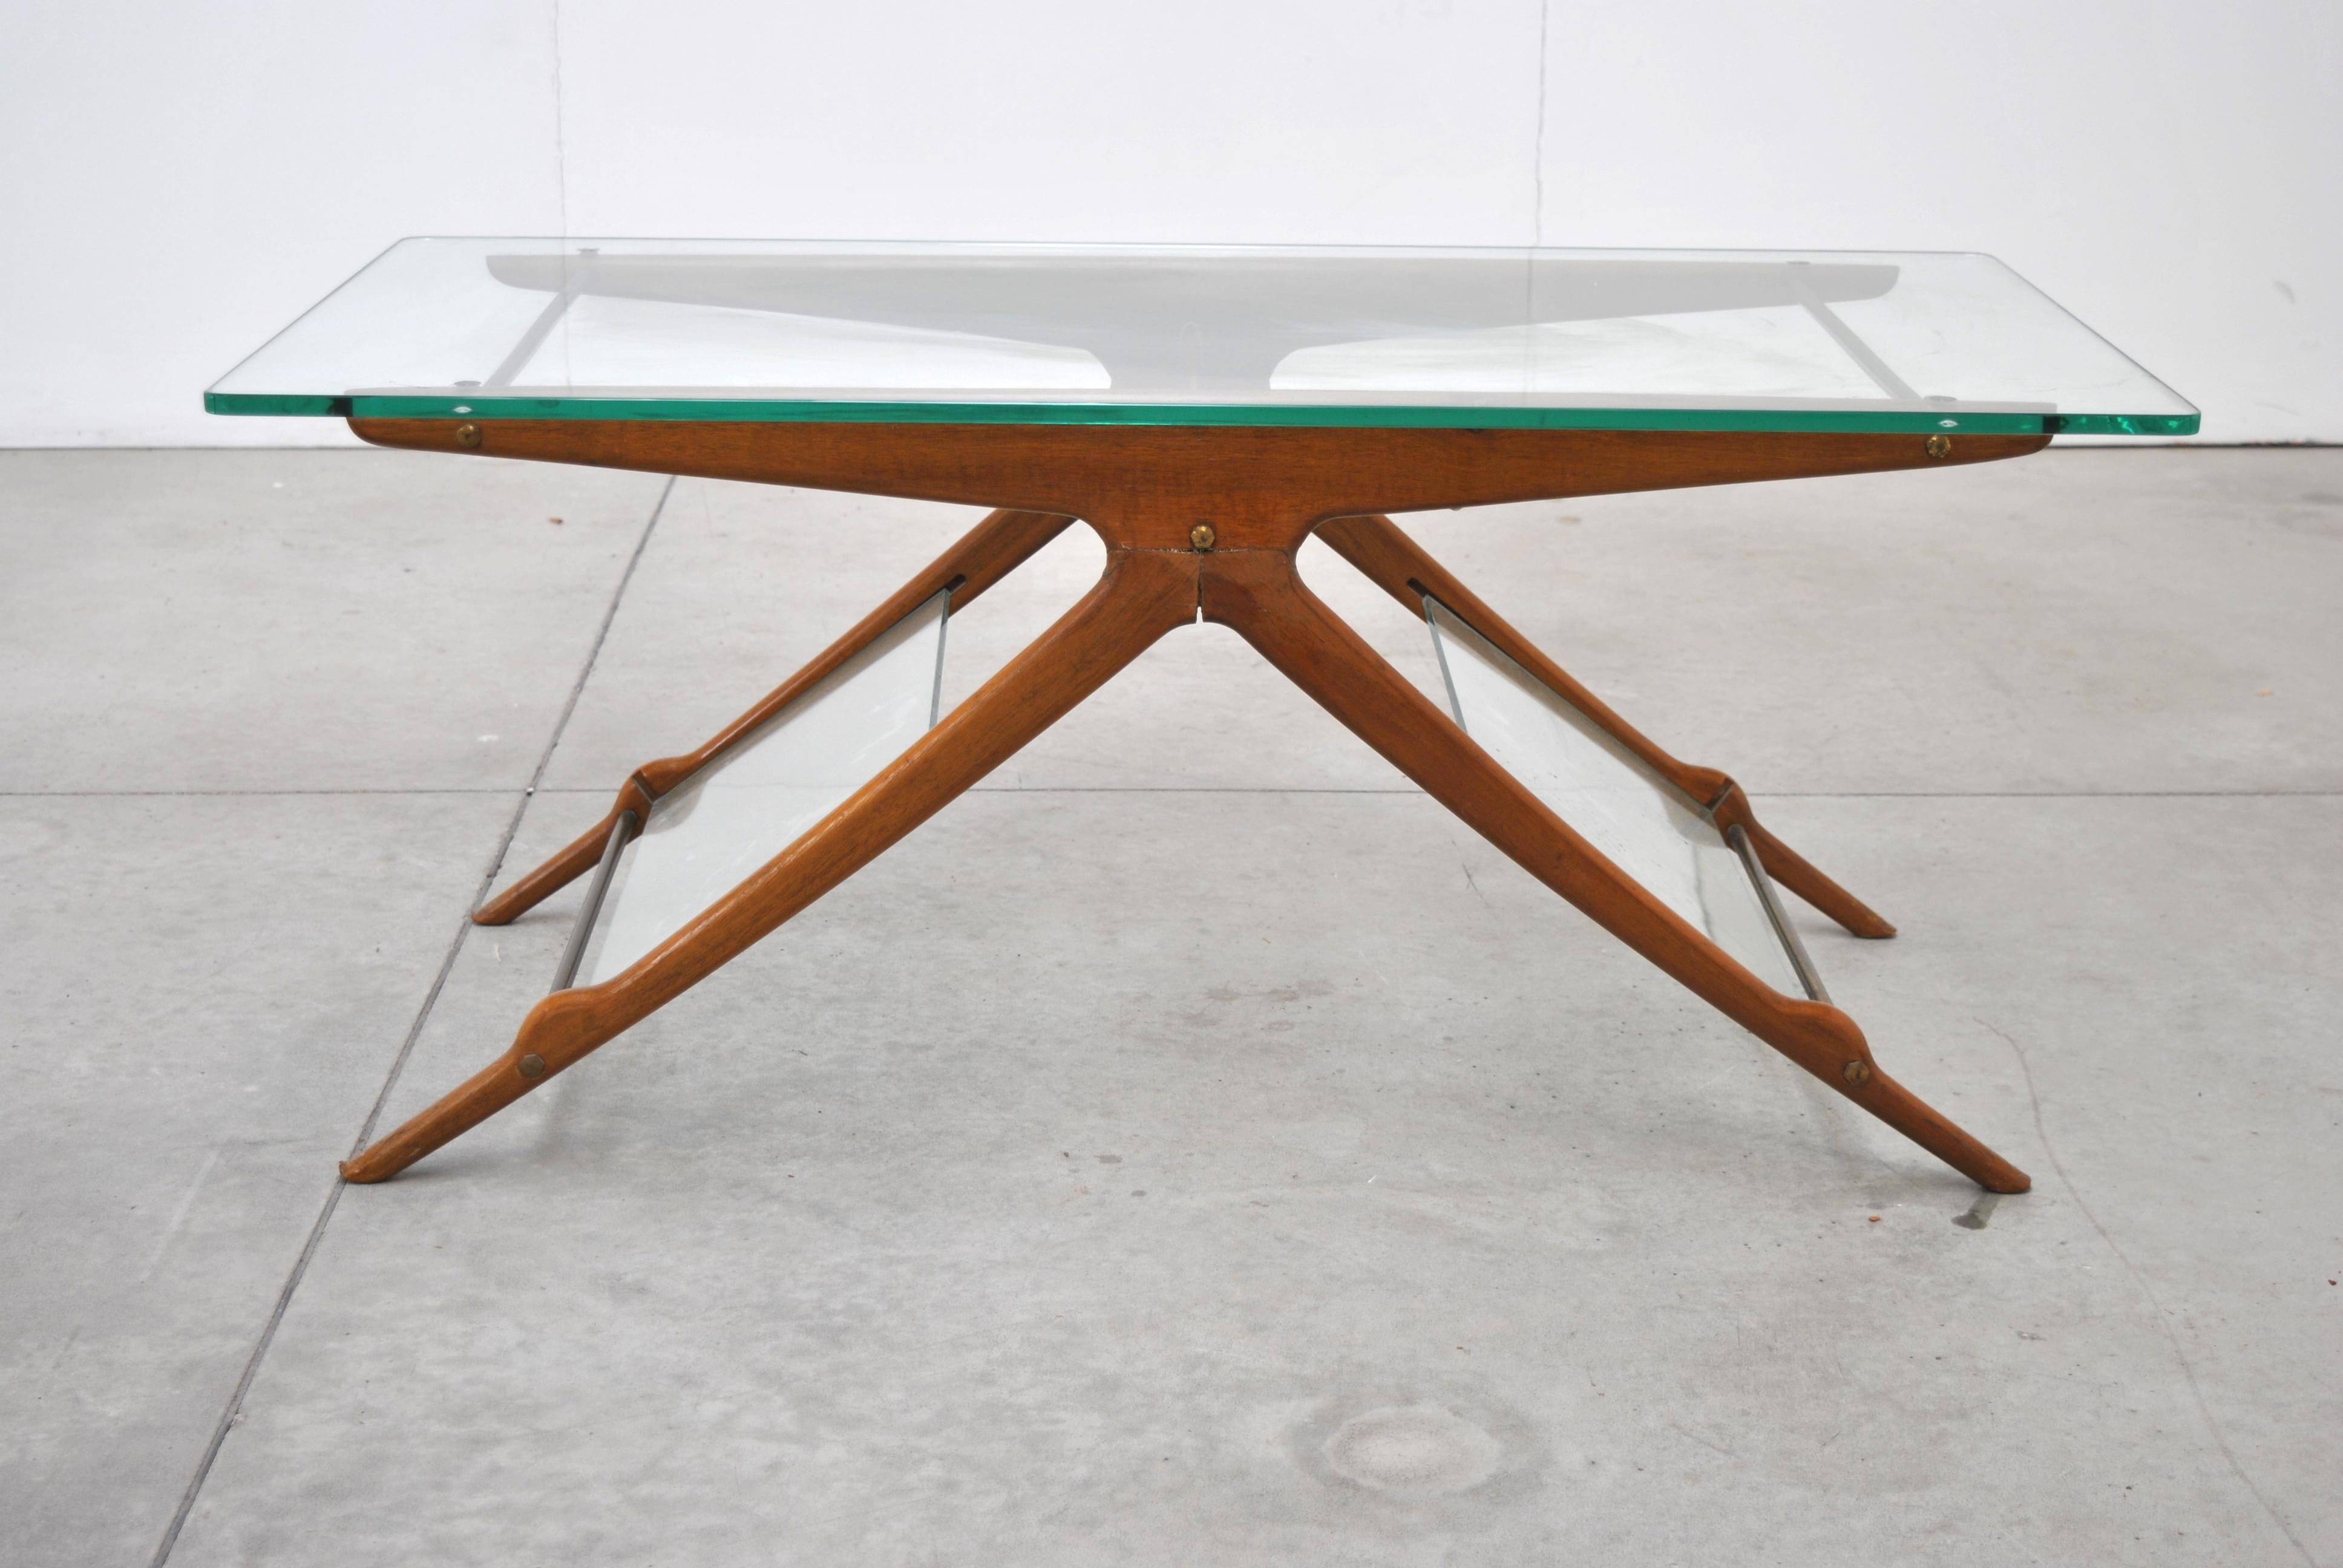 This coffee table was designed by Cesare Lacca in Italy in the 1950s. The wooden structure has the shape of a spread T.
Glass plates have been inserted between the pairs of legs to serve as magazine holders. The tabletop is also made of glass and